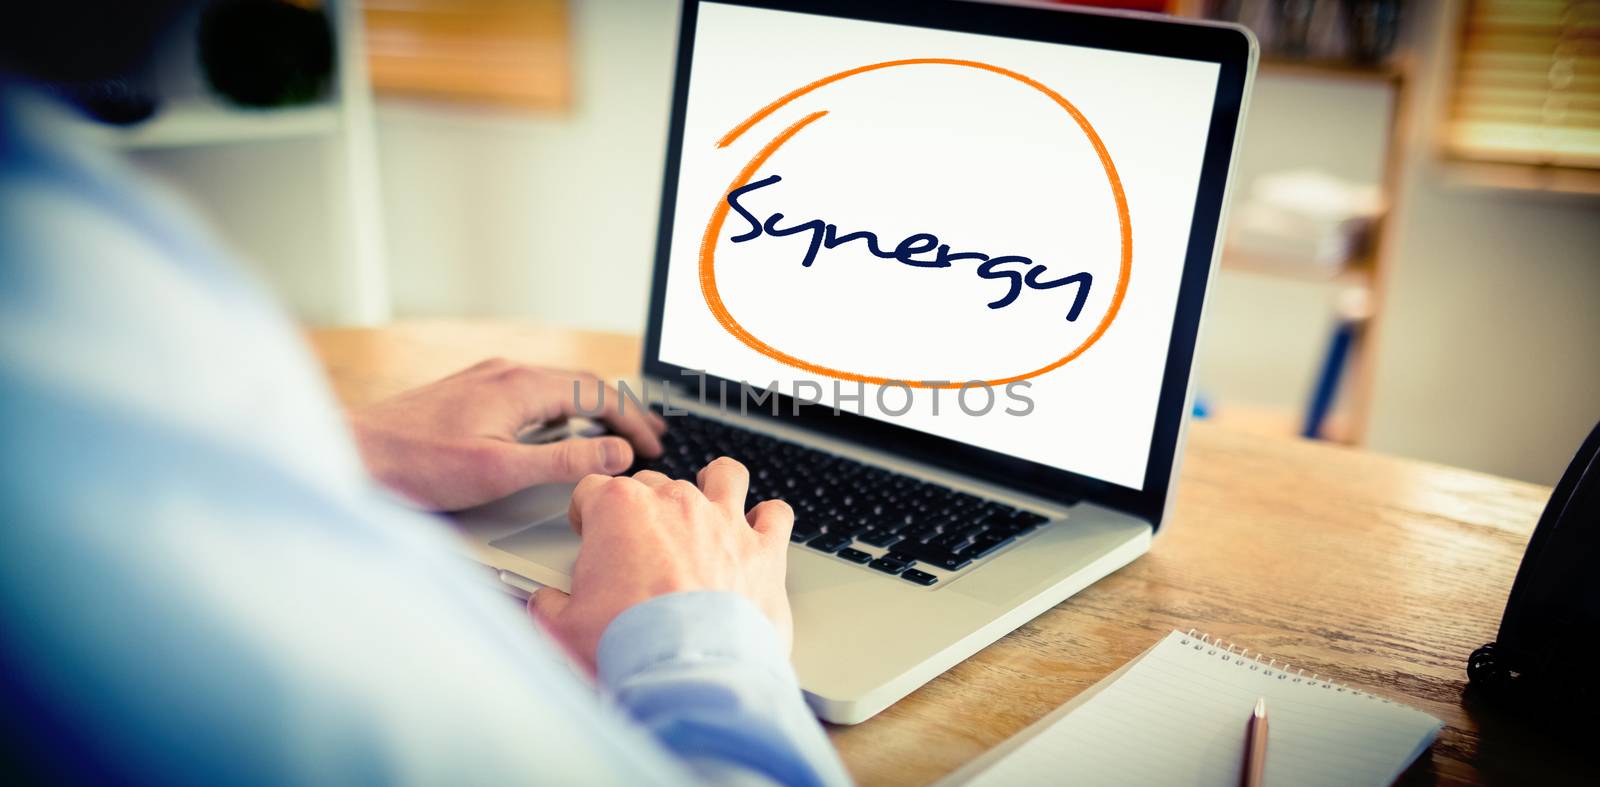 Synergy against businessman working on his laptop by Wavebreakmedia